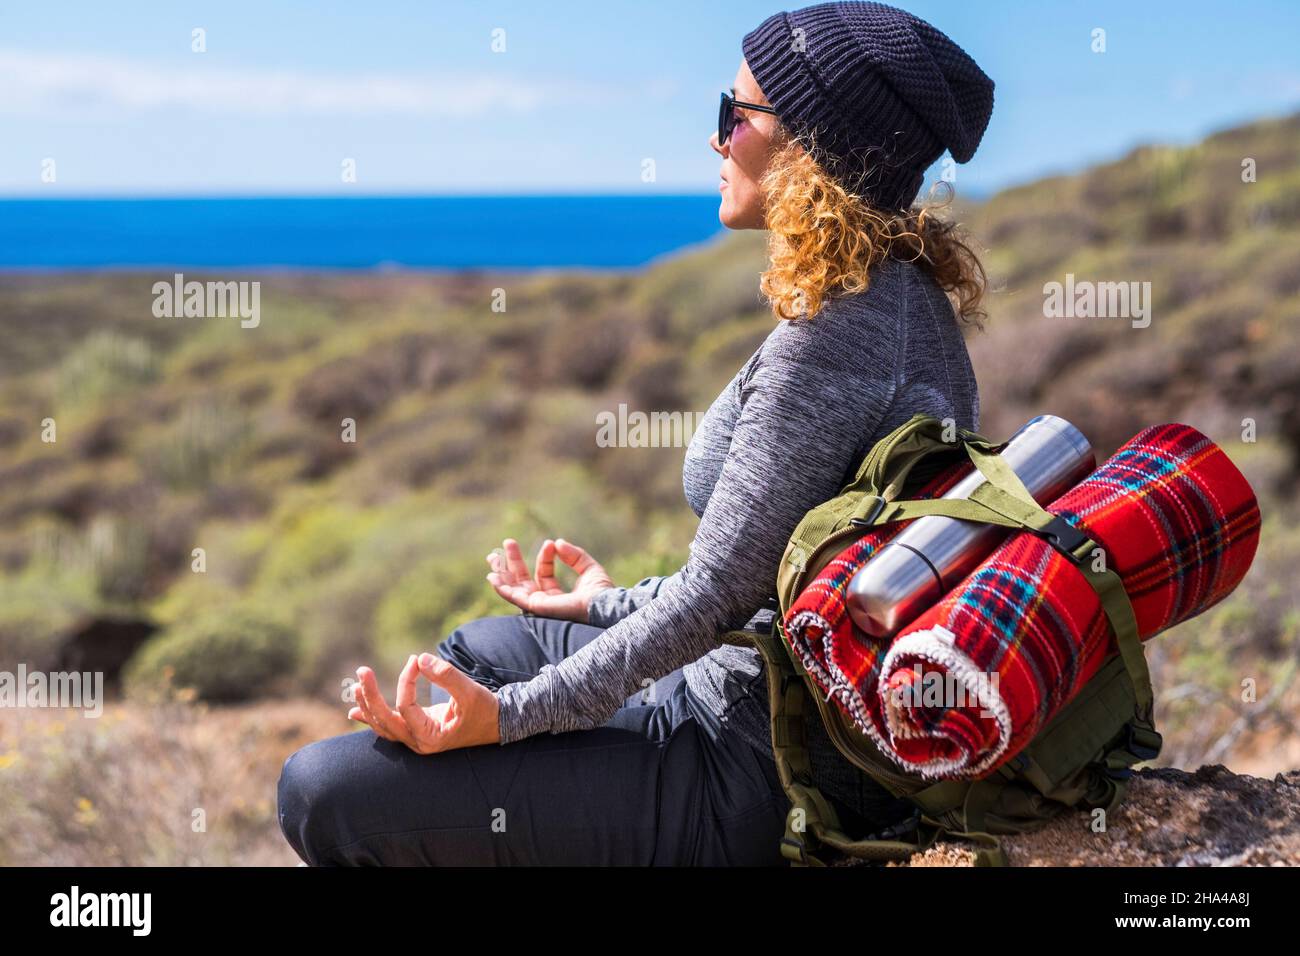 relaxed woman in meditation position sitting on the rocks during travel backpack adventure leisure activity outdoor. adult female enjoy active lifestyle and nature Stock Photo